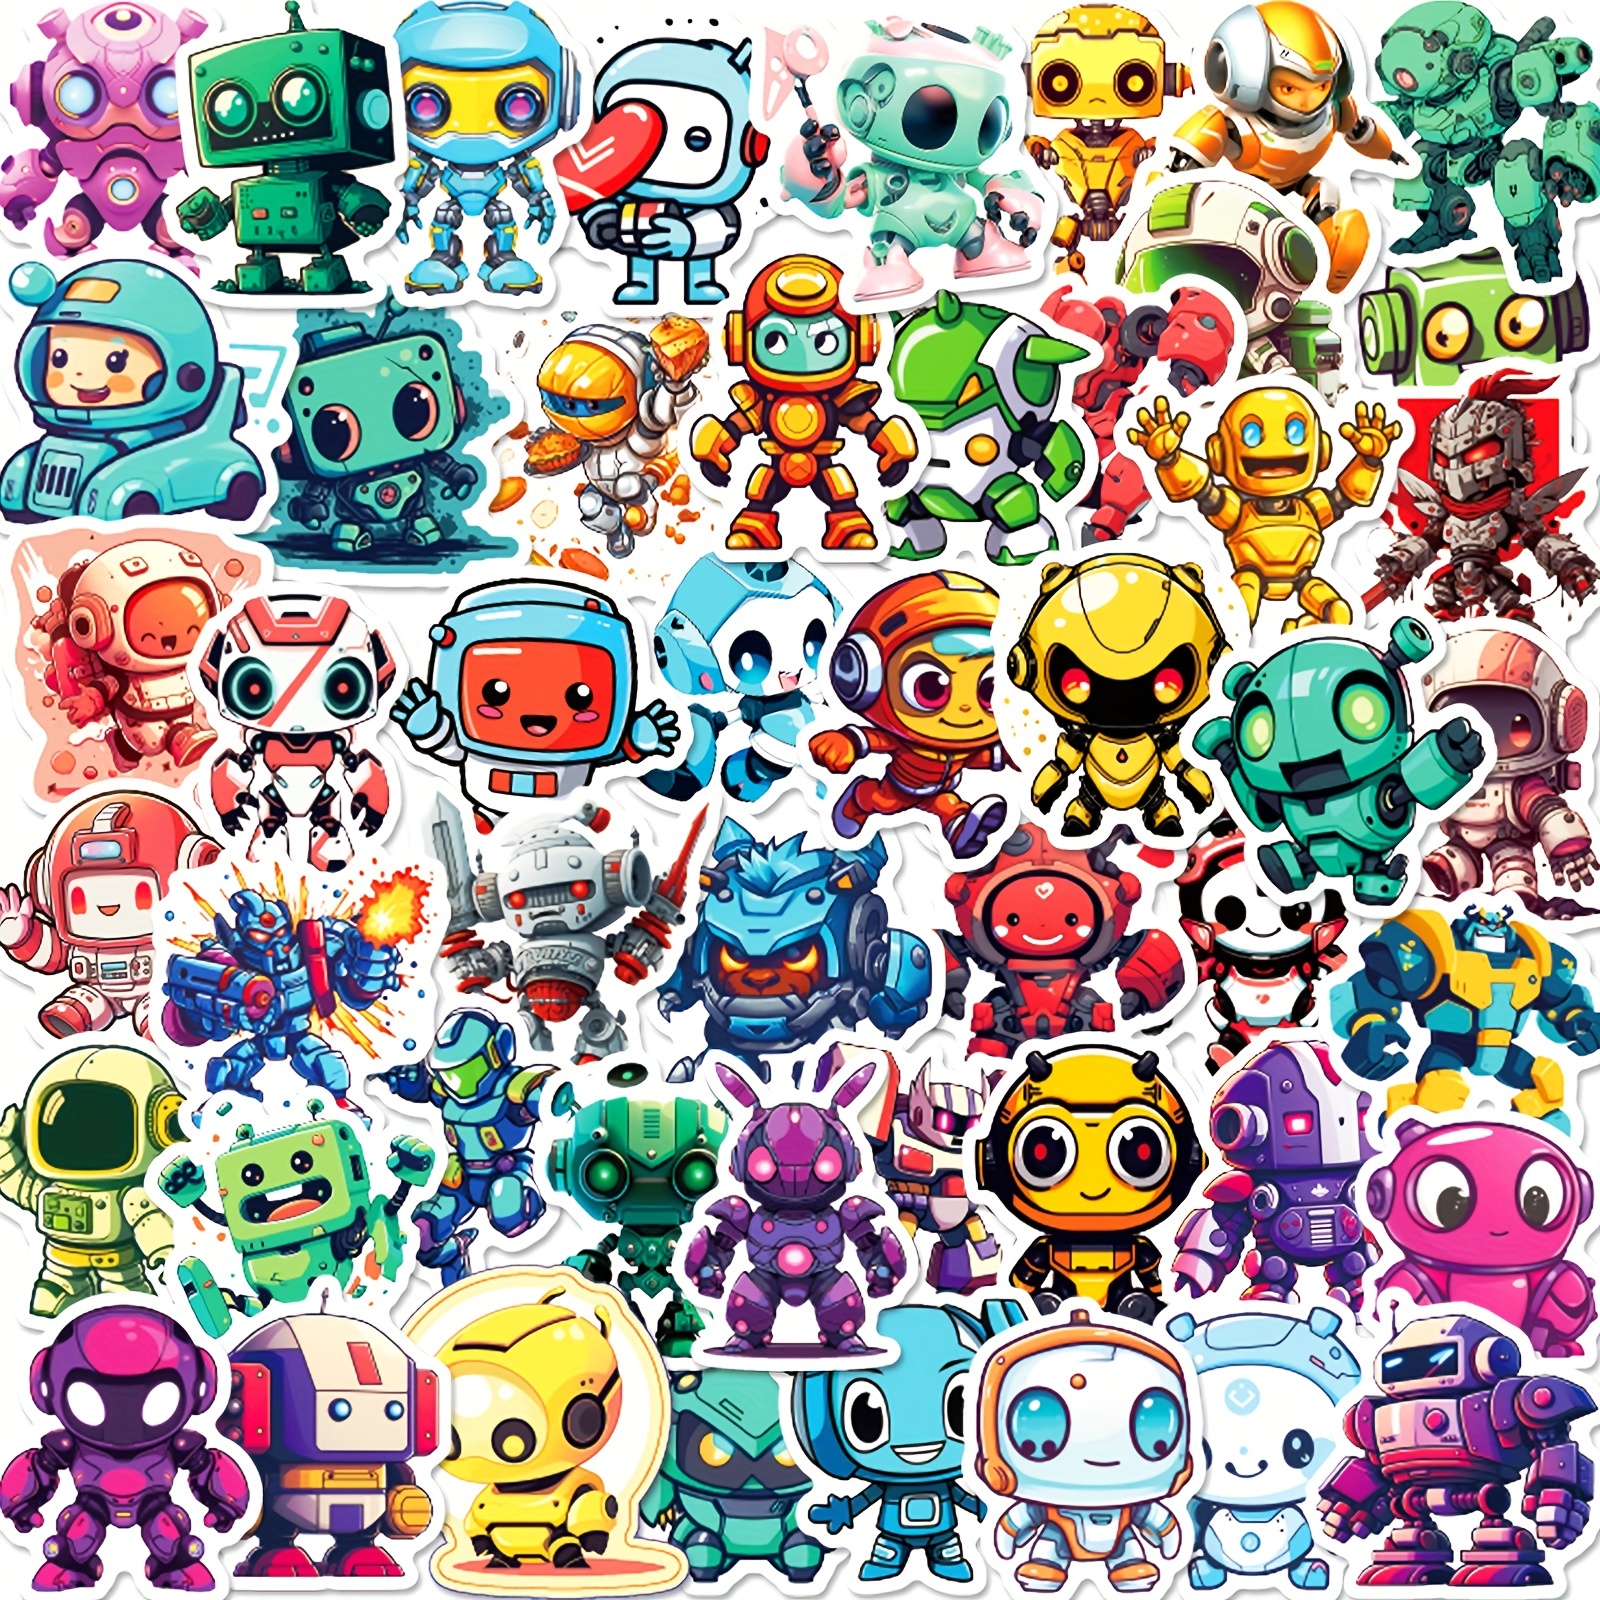 60pcs Robot Stickers for Laptop and Computer, Cartoon Animation Waterproof Vinyl Stickers for Water Bottle Skateboard Guita Car Bumper Luggage